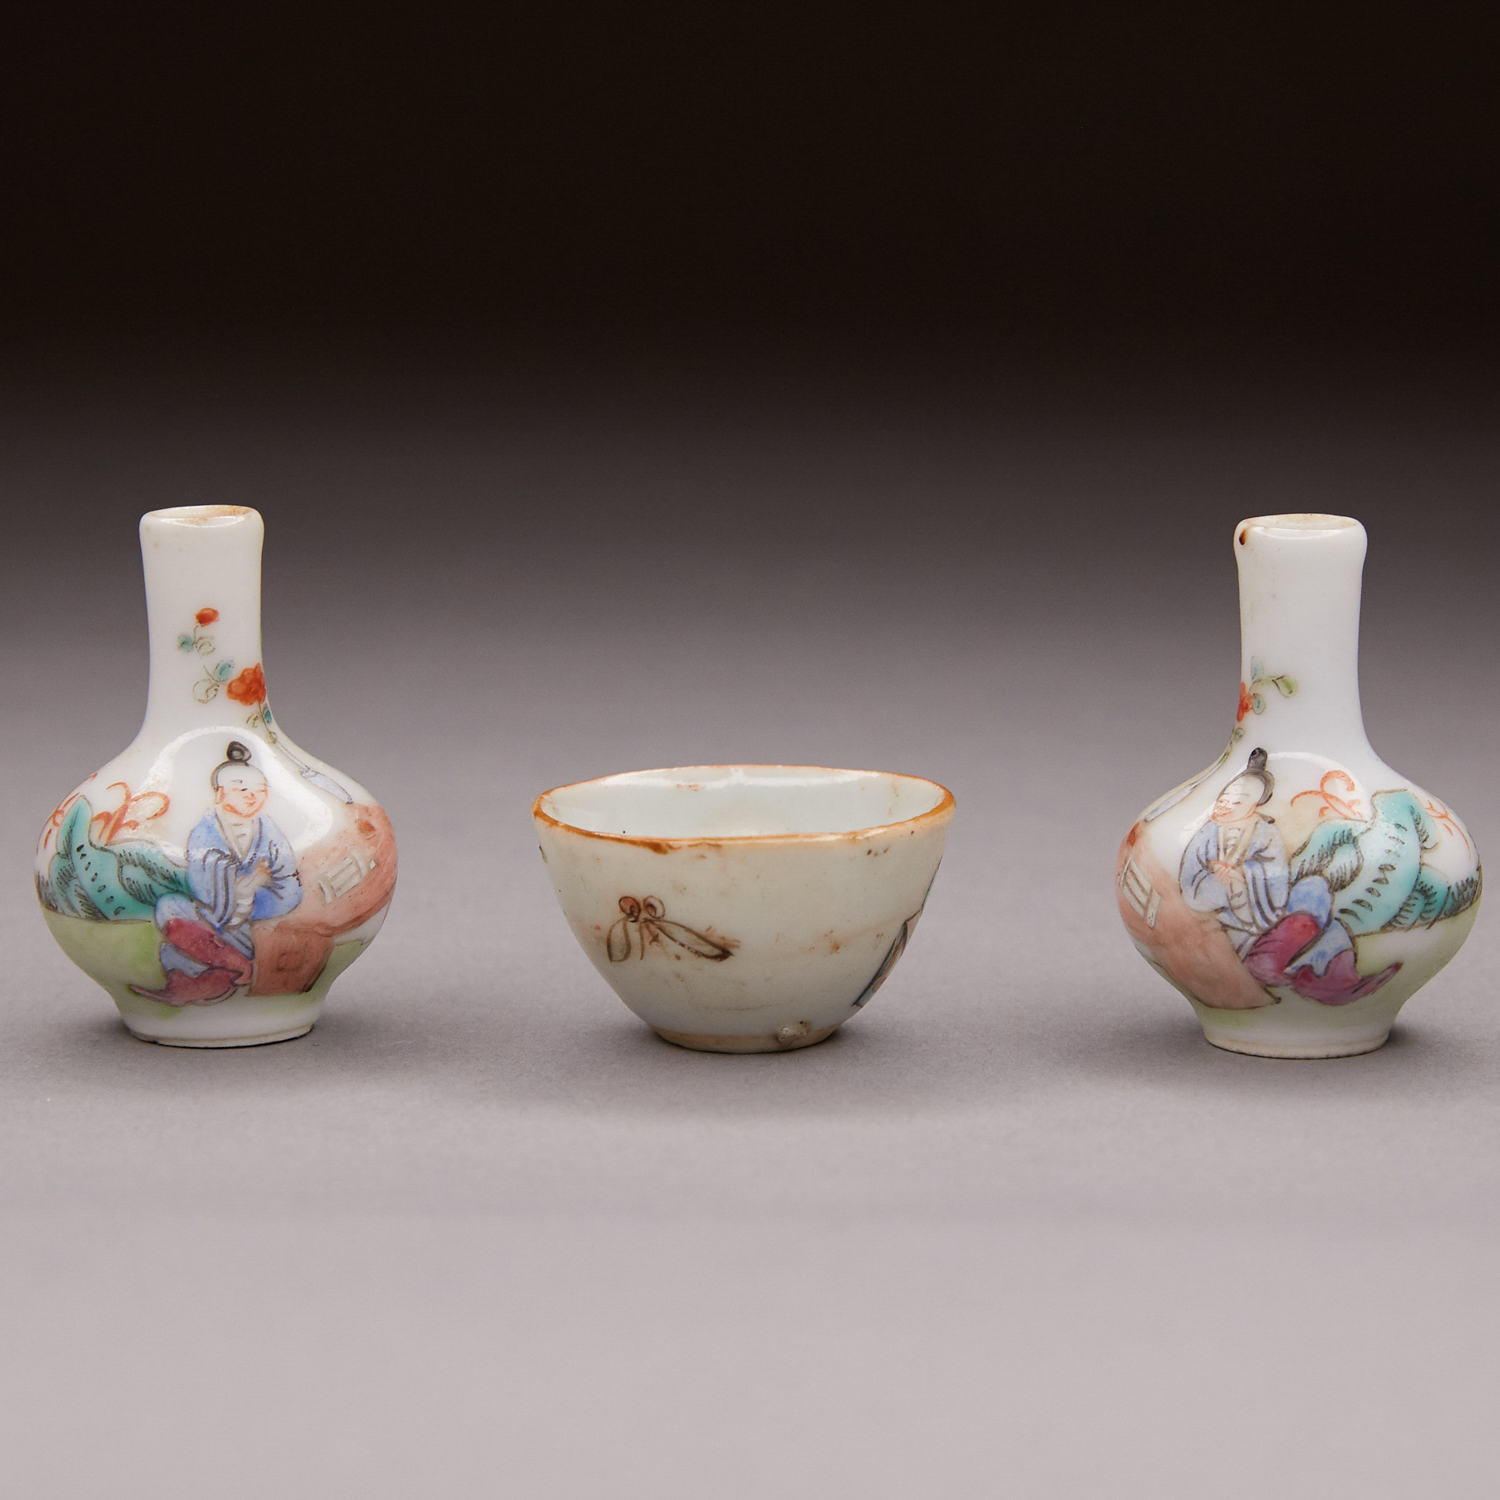 Grp:3 Late Qing Chinese Miniature Porcelain Objects - Image 3 of 4